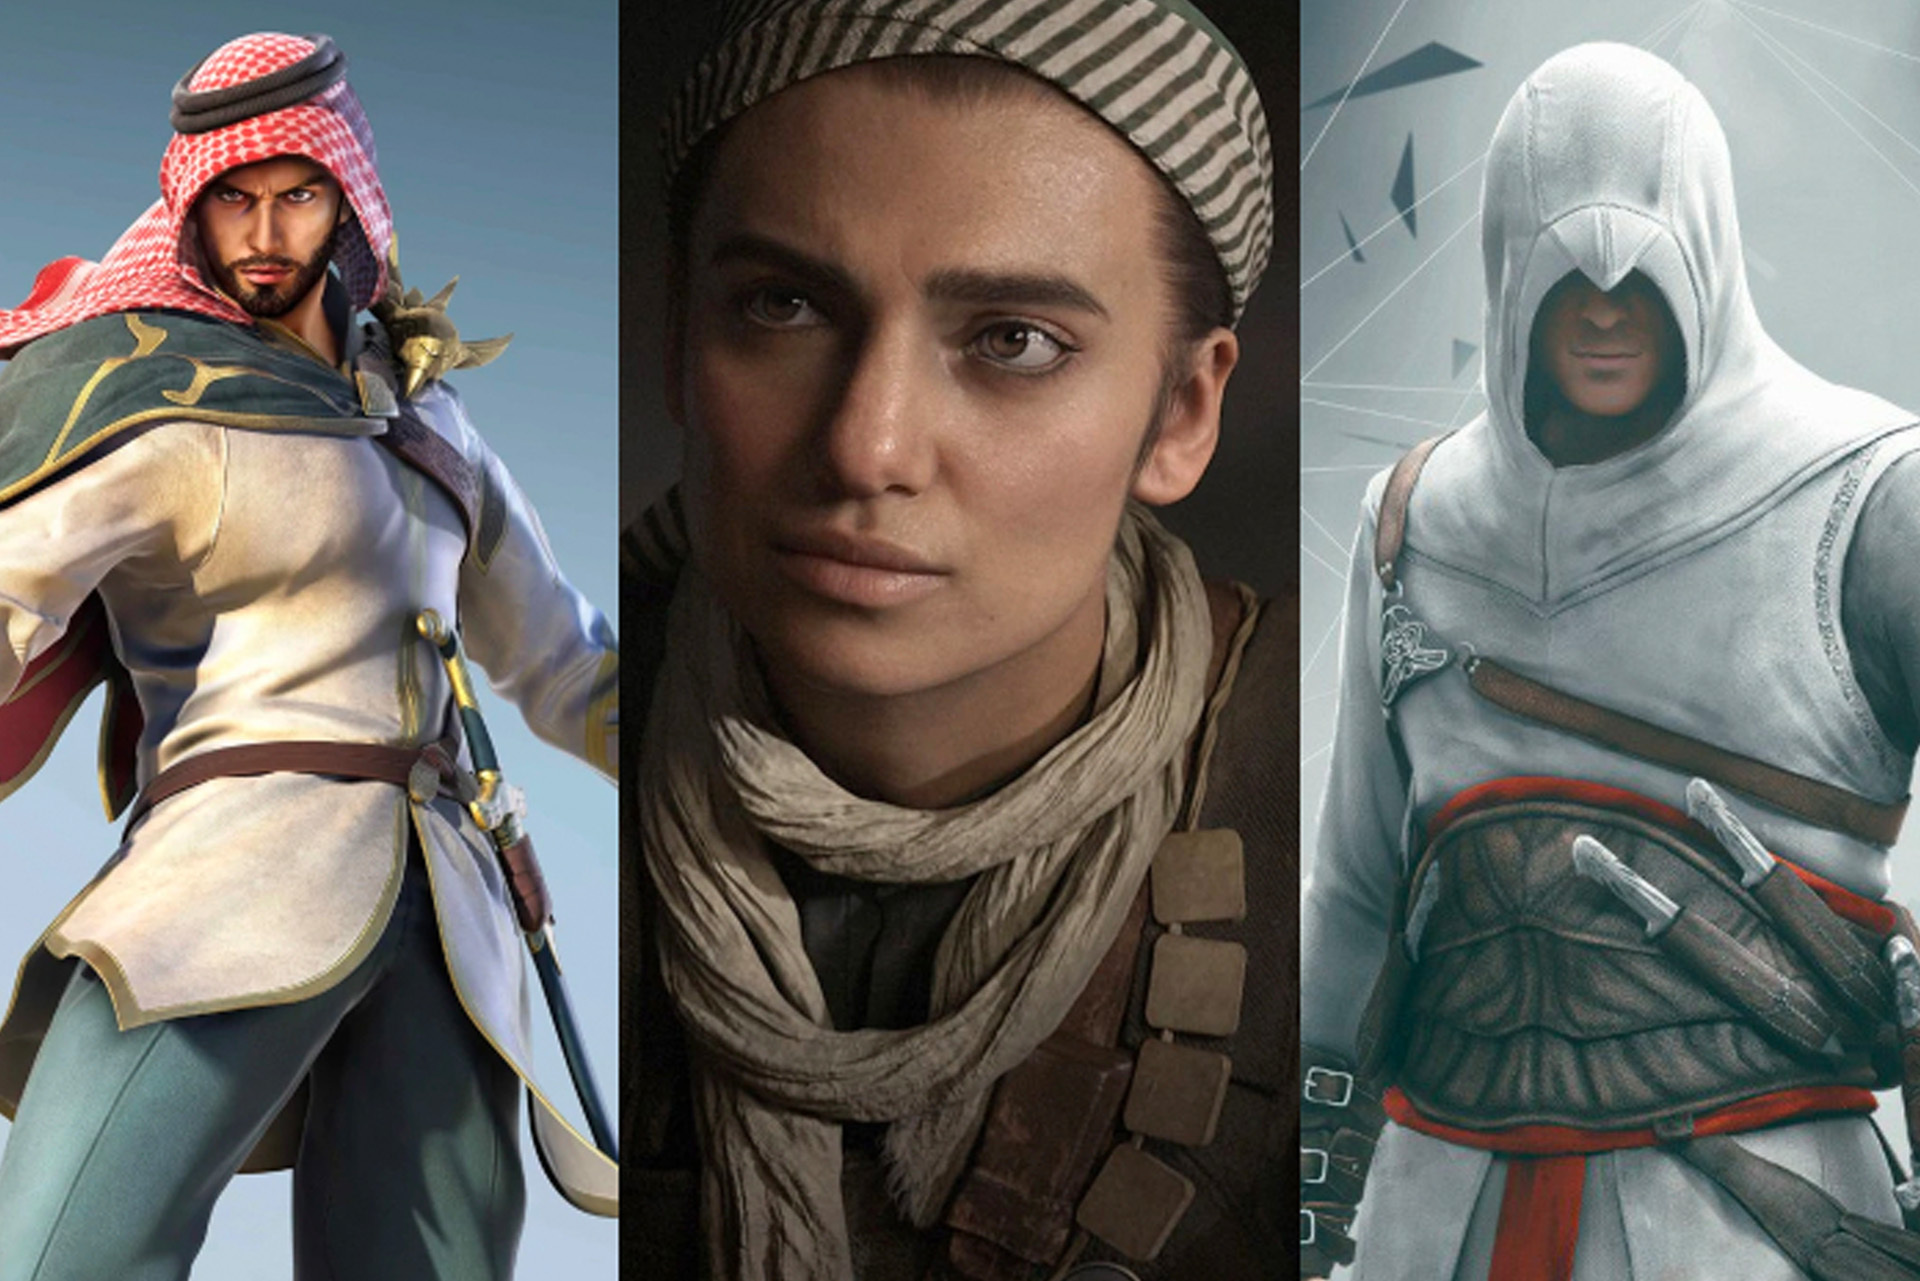 Elevating Diversity: The Ascendancy of Arab Characters in the Gaming Industry - A Five-Year Review